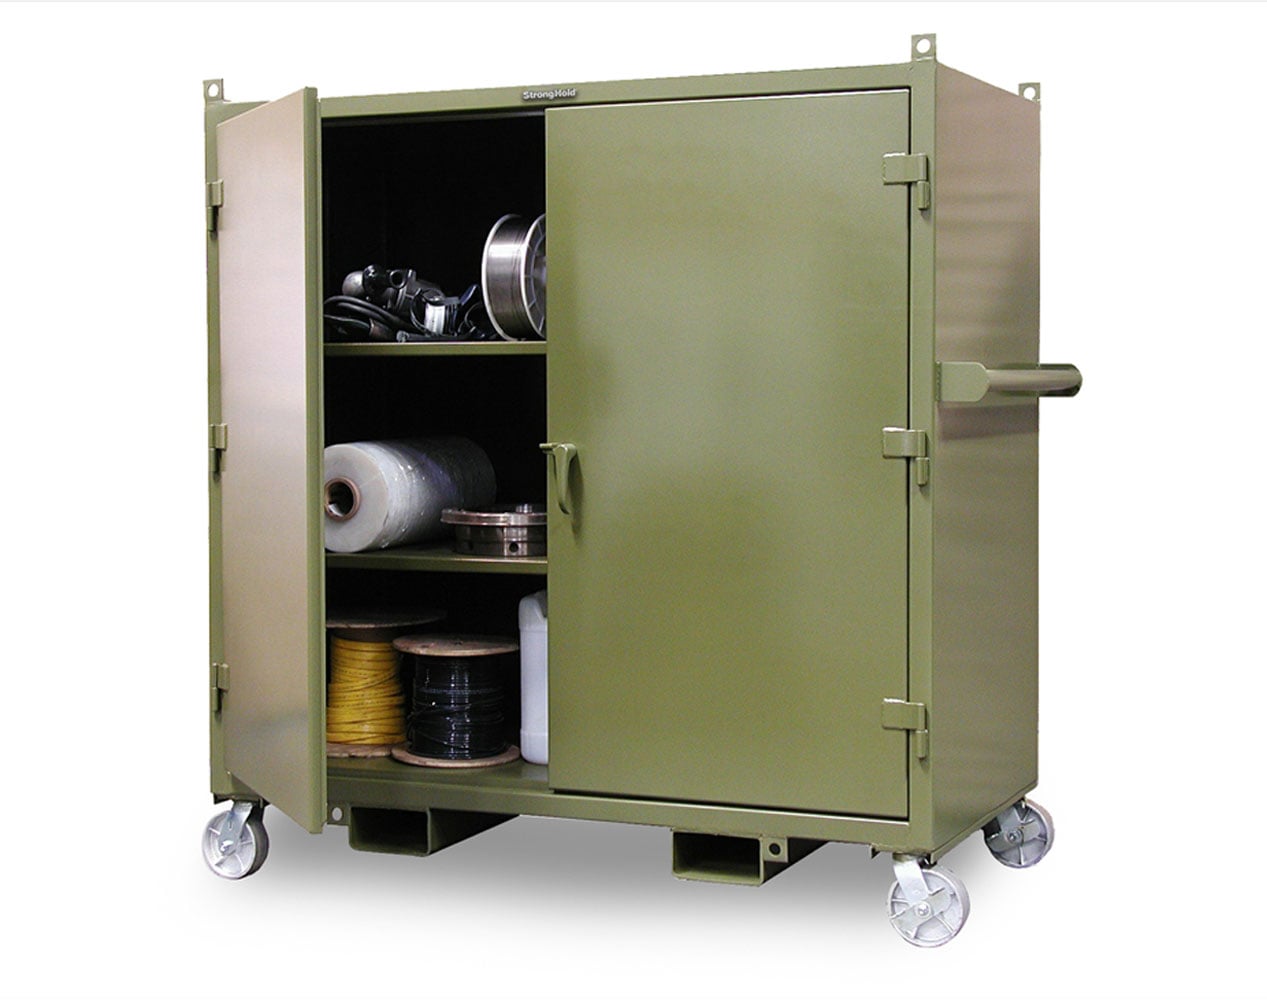 Extreme Duty 12 GA Mobile Jobsite Cabinet with 2 Shelves, Forklift Pockets, Lifting Lugs - 66 In. W x 34 In. D x 68 In. H